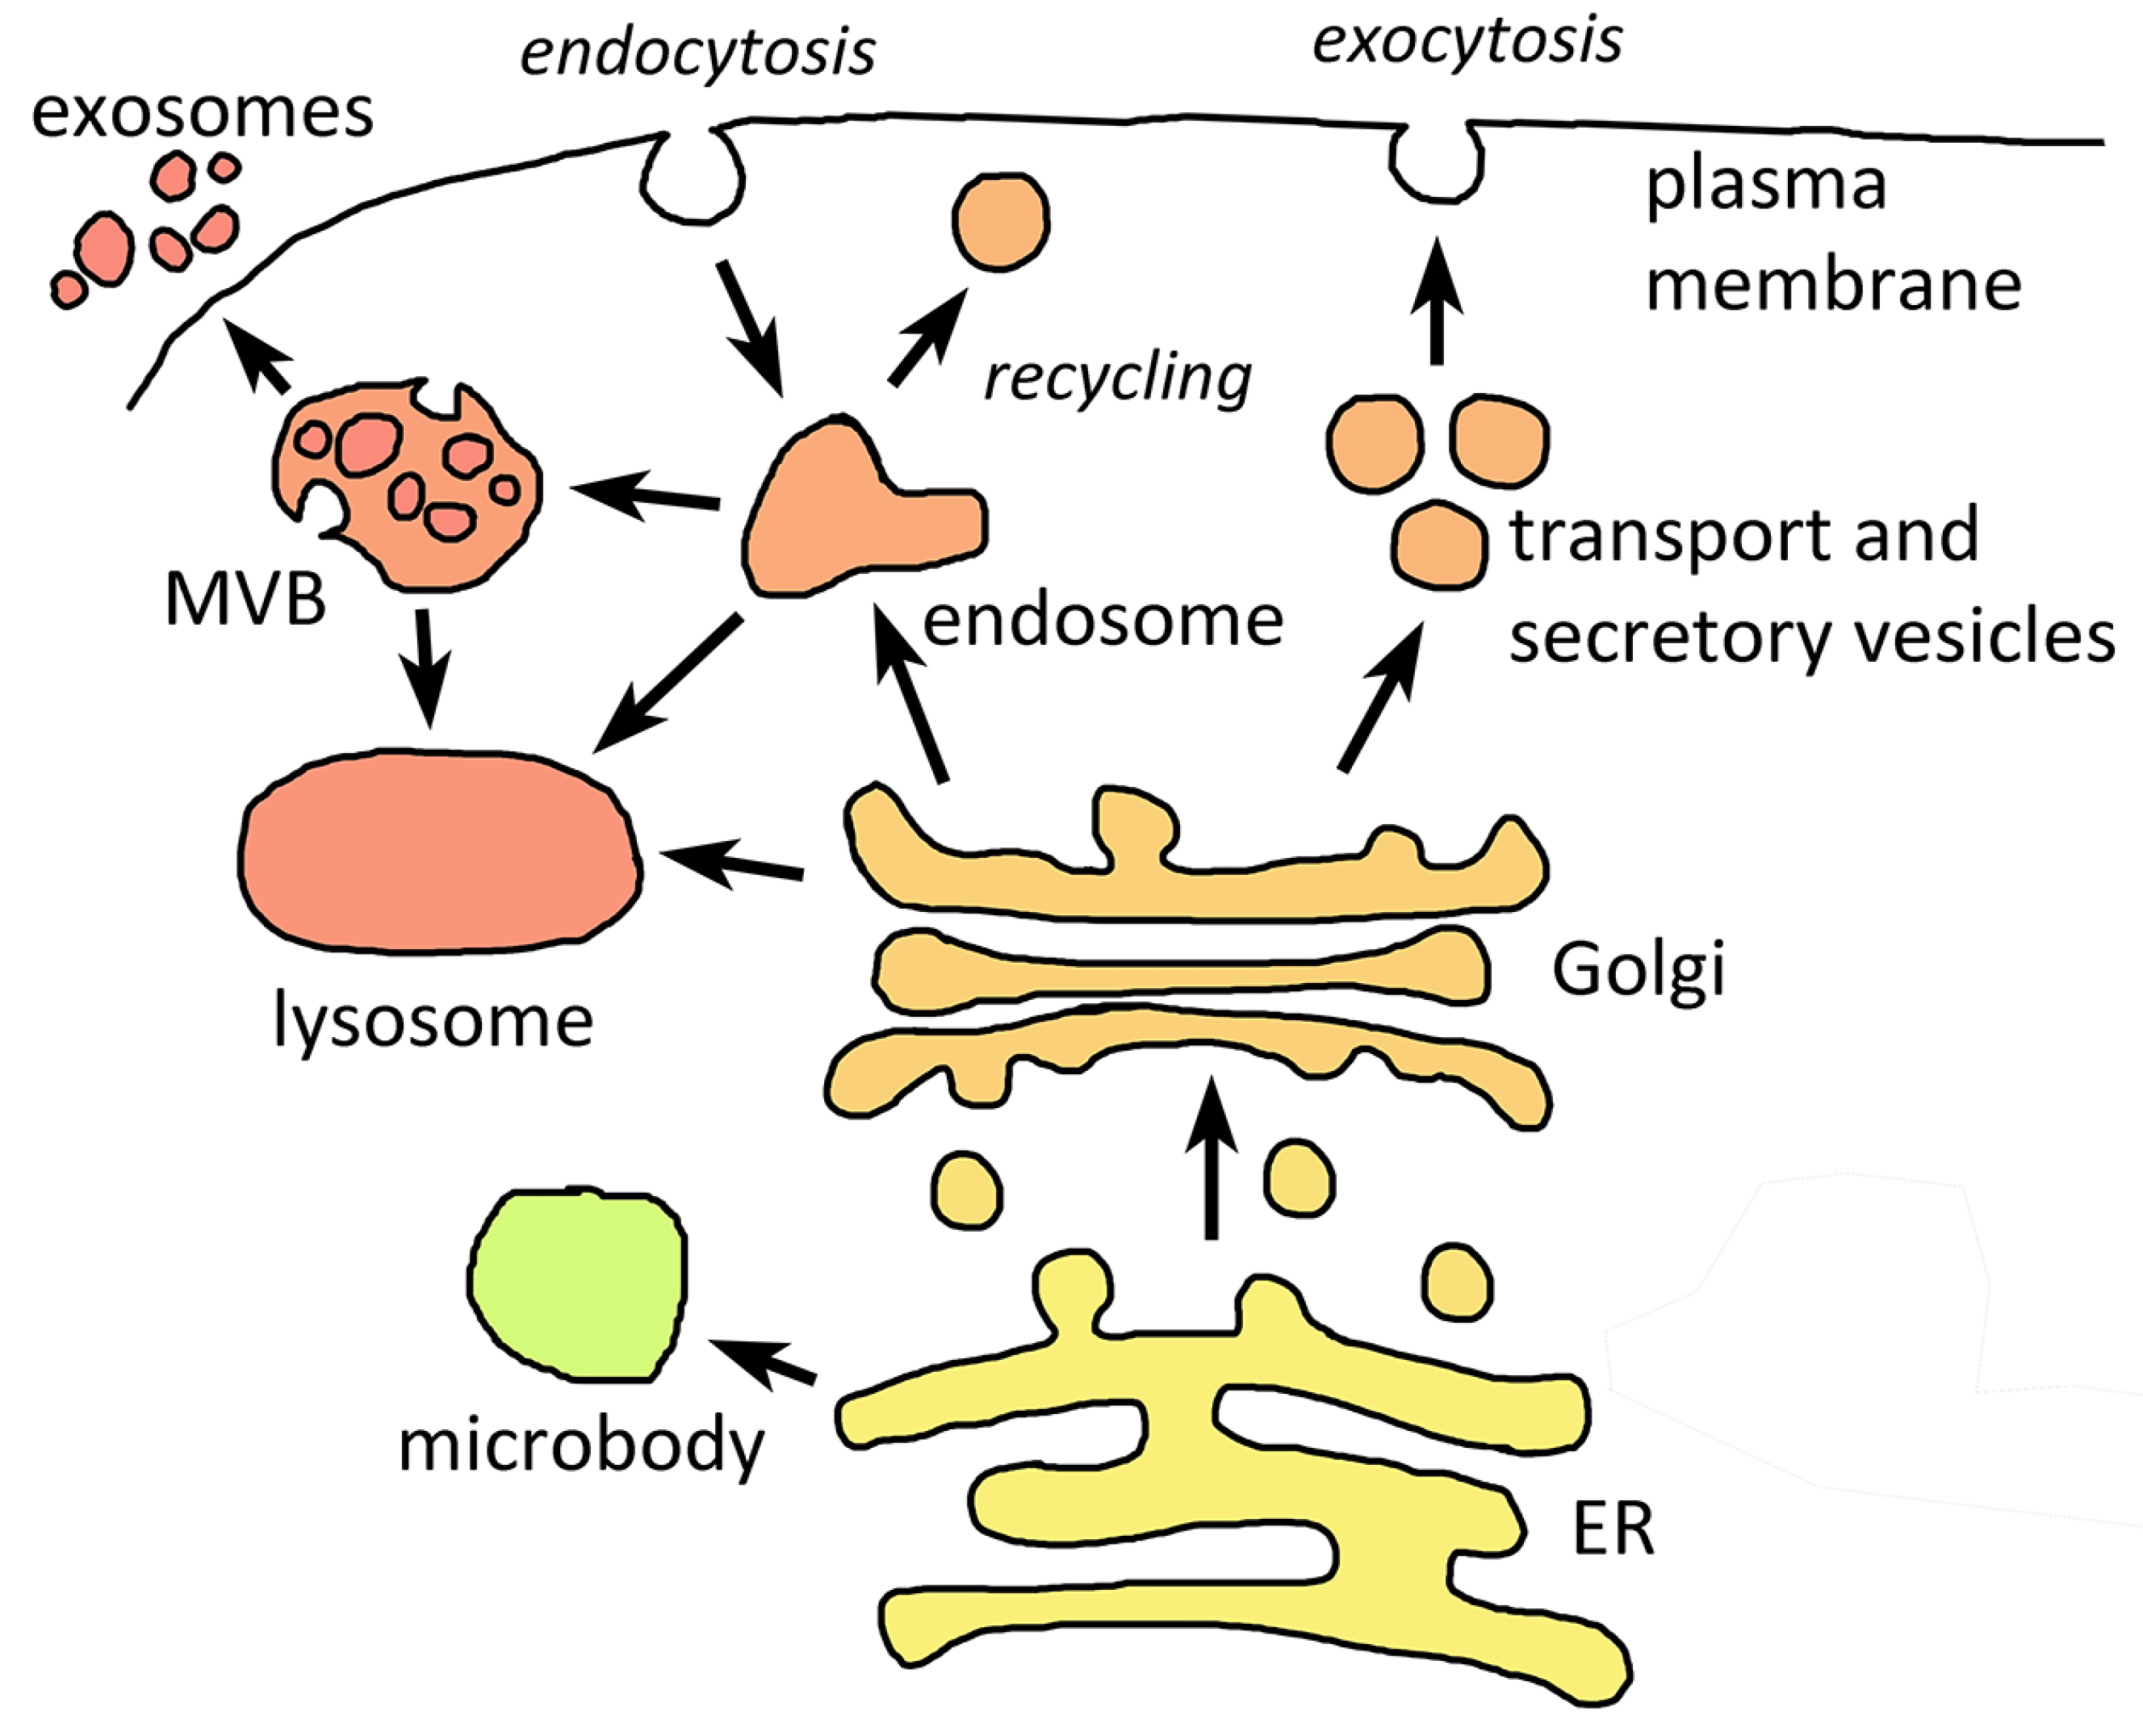 Life | Free Full-Text | Unique Endomembrane Systems and Virulence in  Pathogenic Protozoa